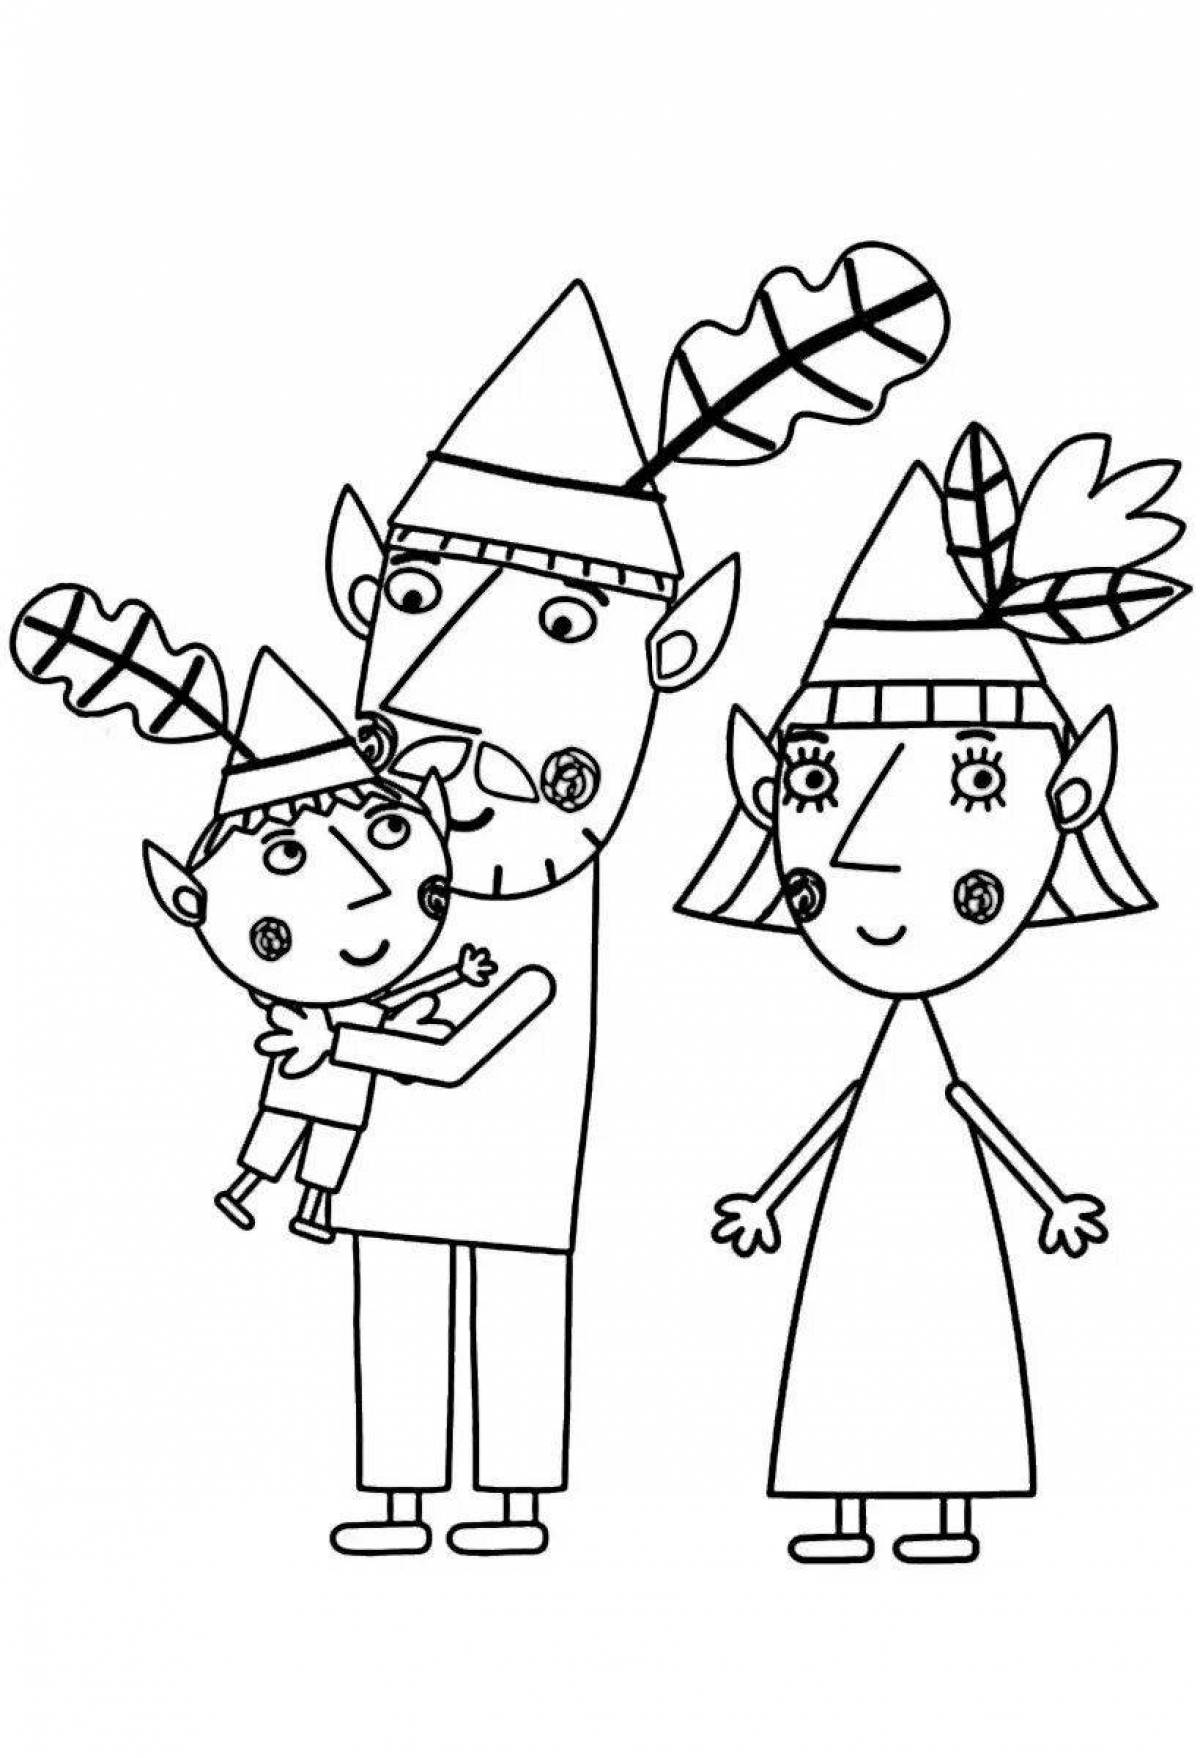 Wonderful ben and holly coloring book